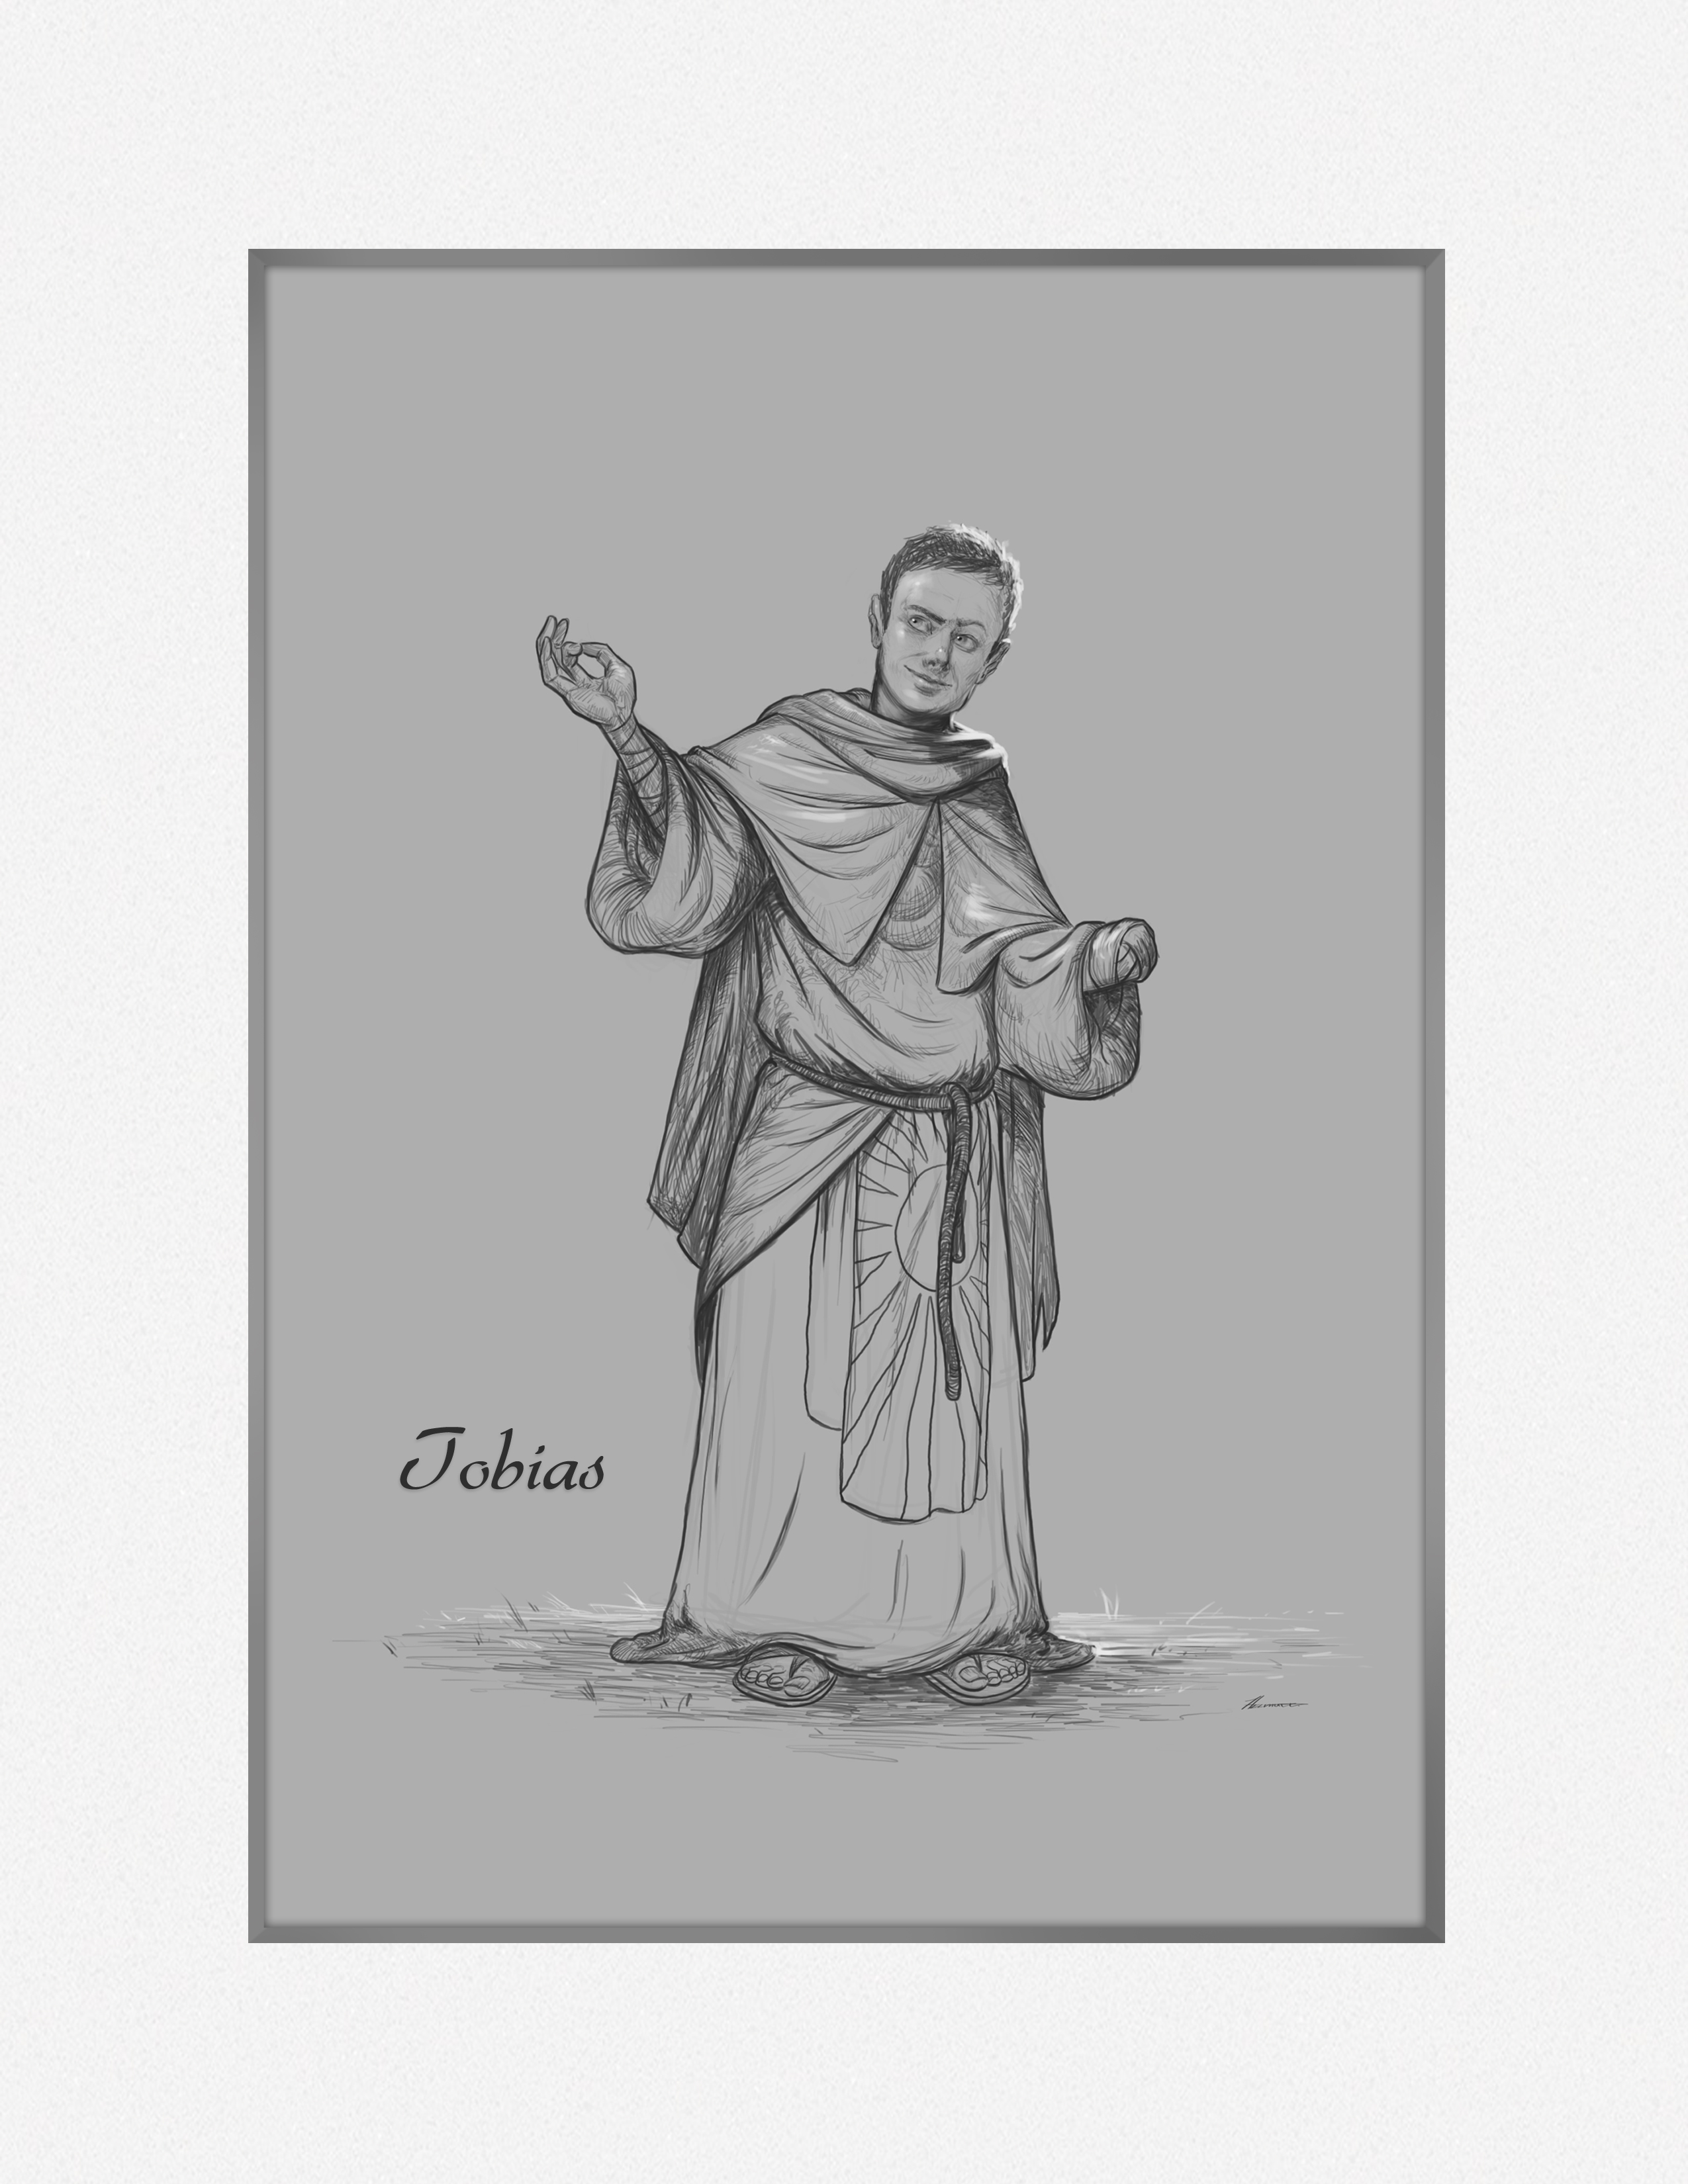 Sketch of Tobias in priestly robes